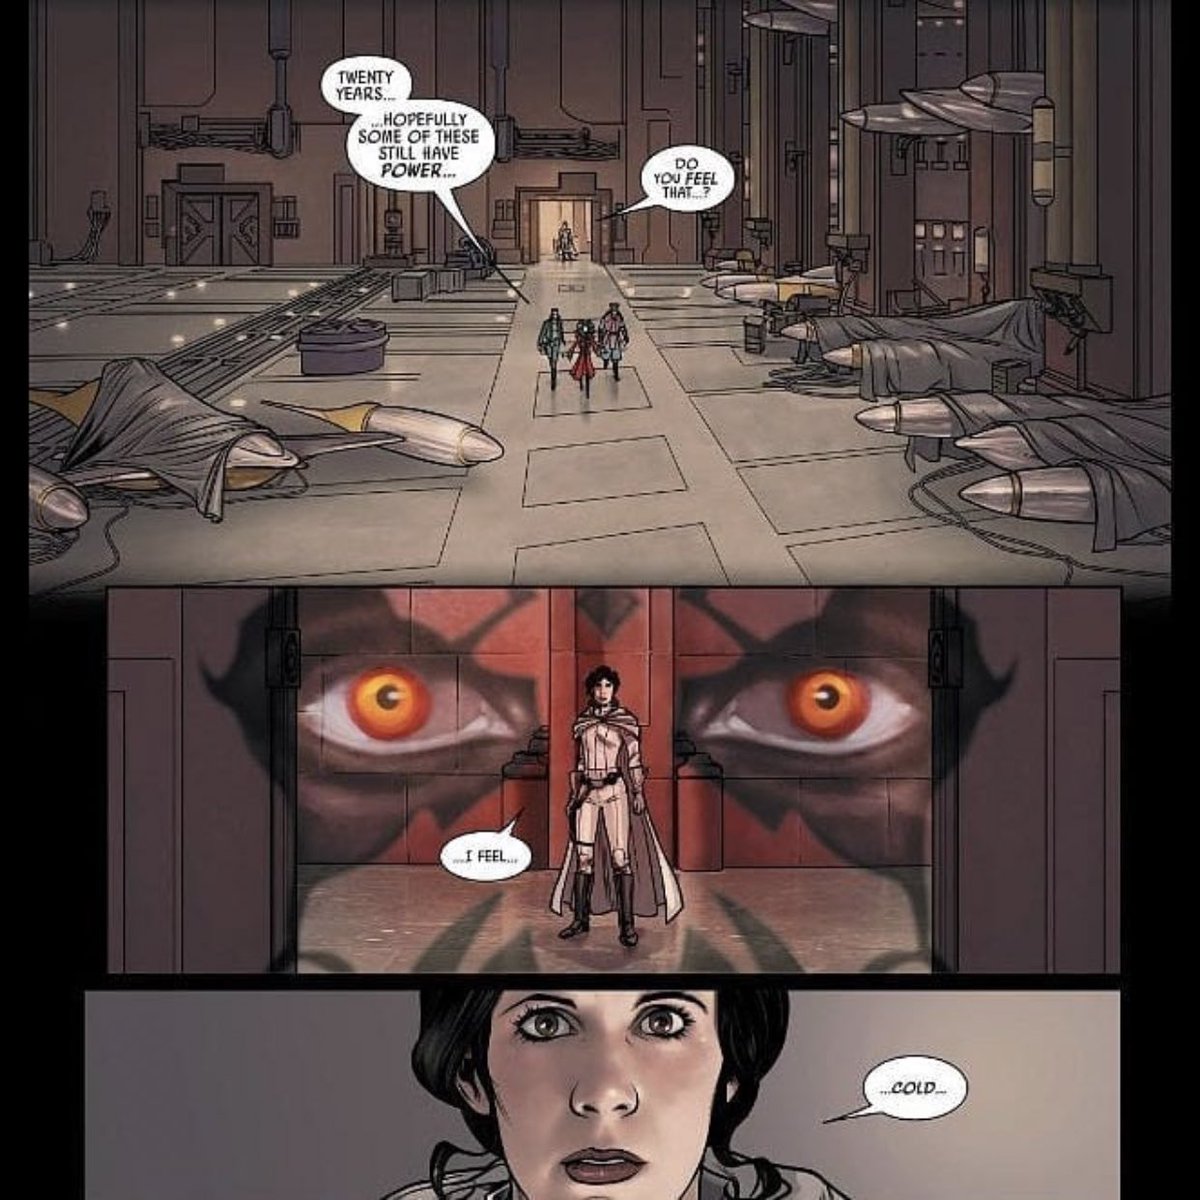 Princess Leia feeling the force energy and Darth Maul’s dark energy and rage throughout a hanger on Naboo 30 something years after the events taken place there.